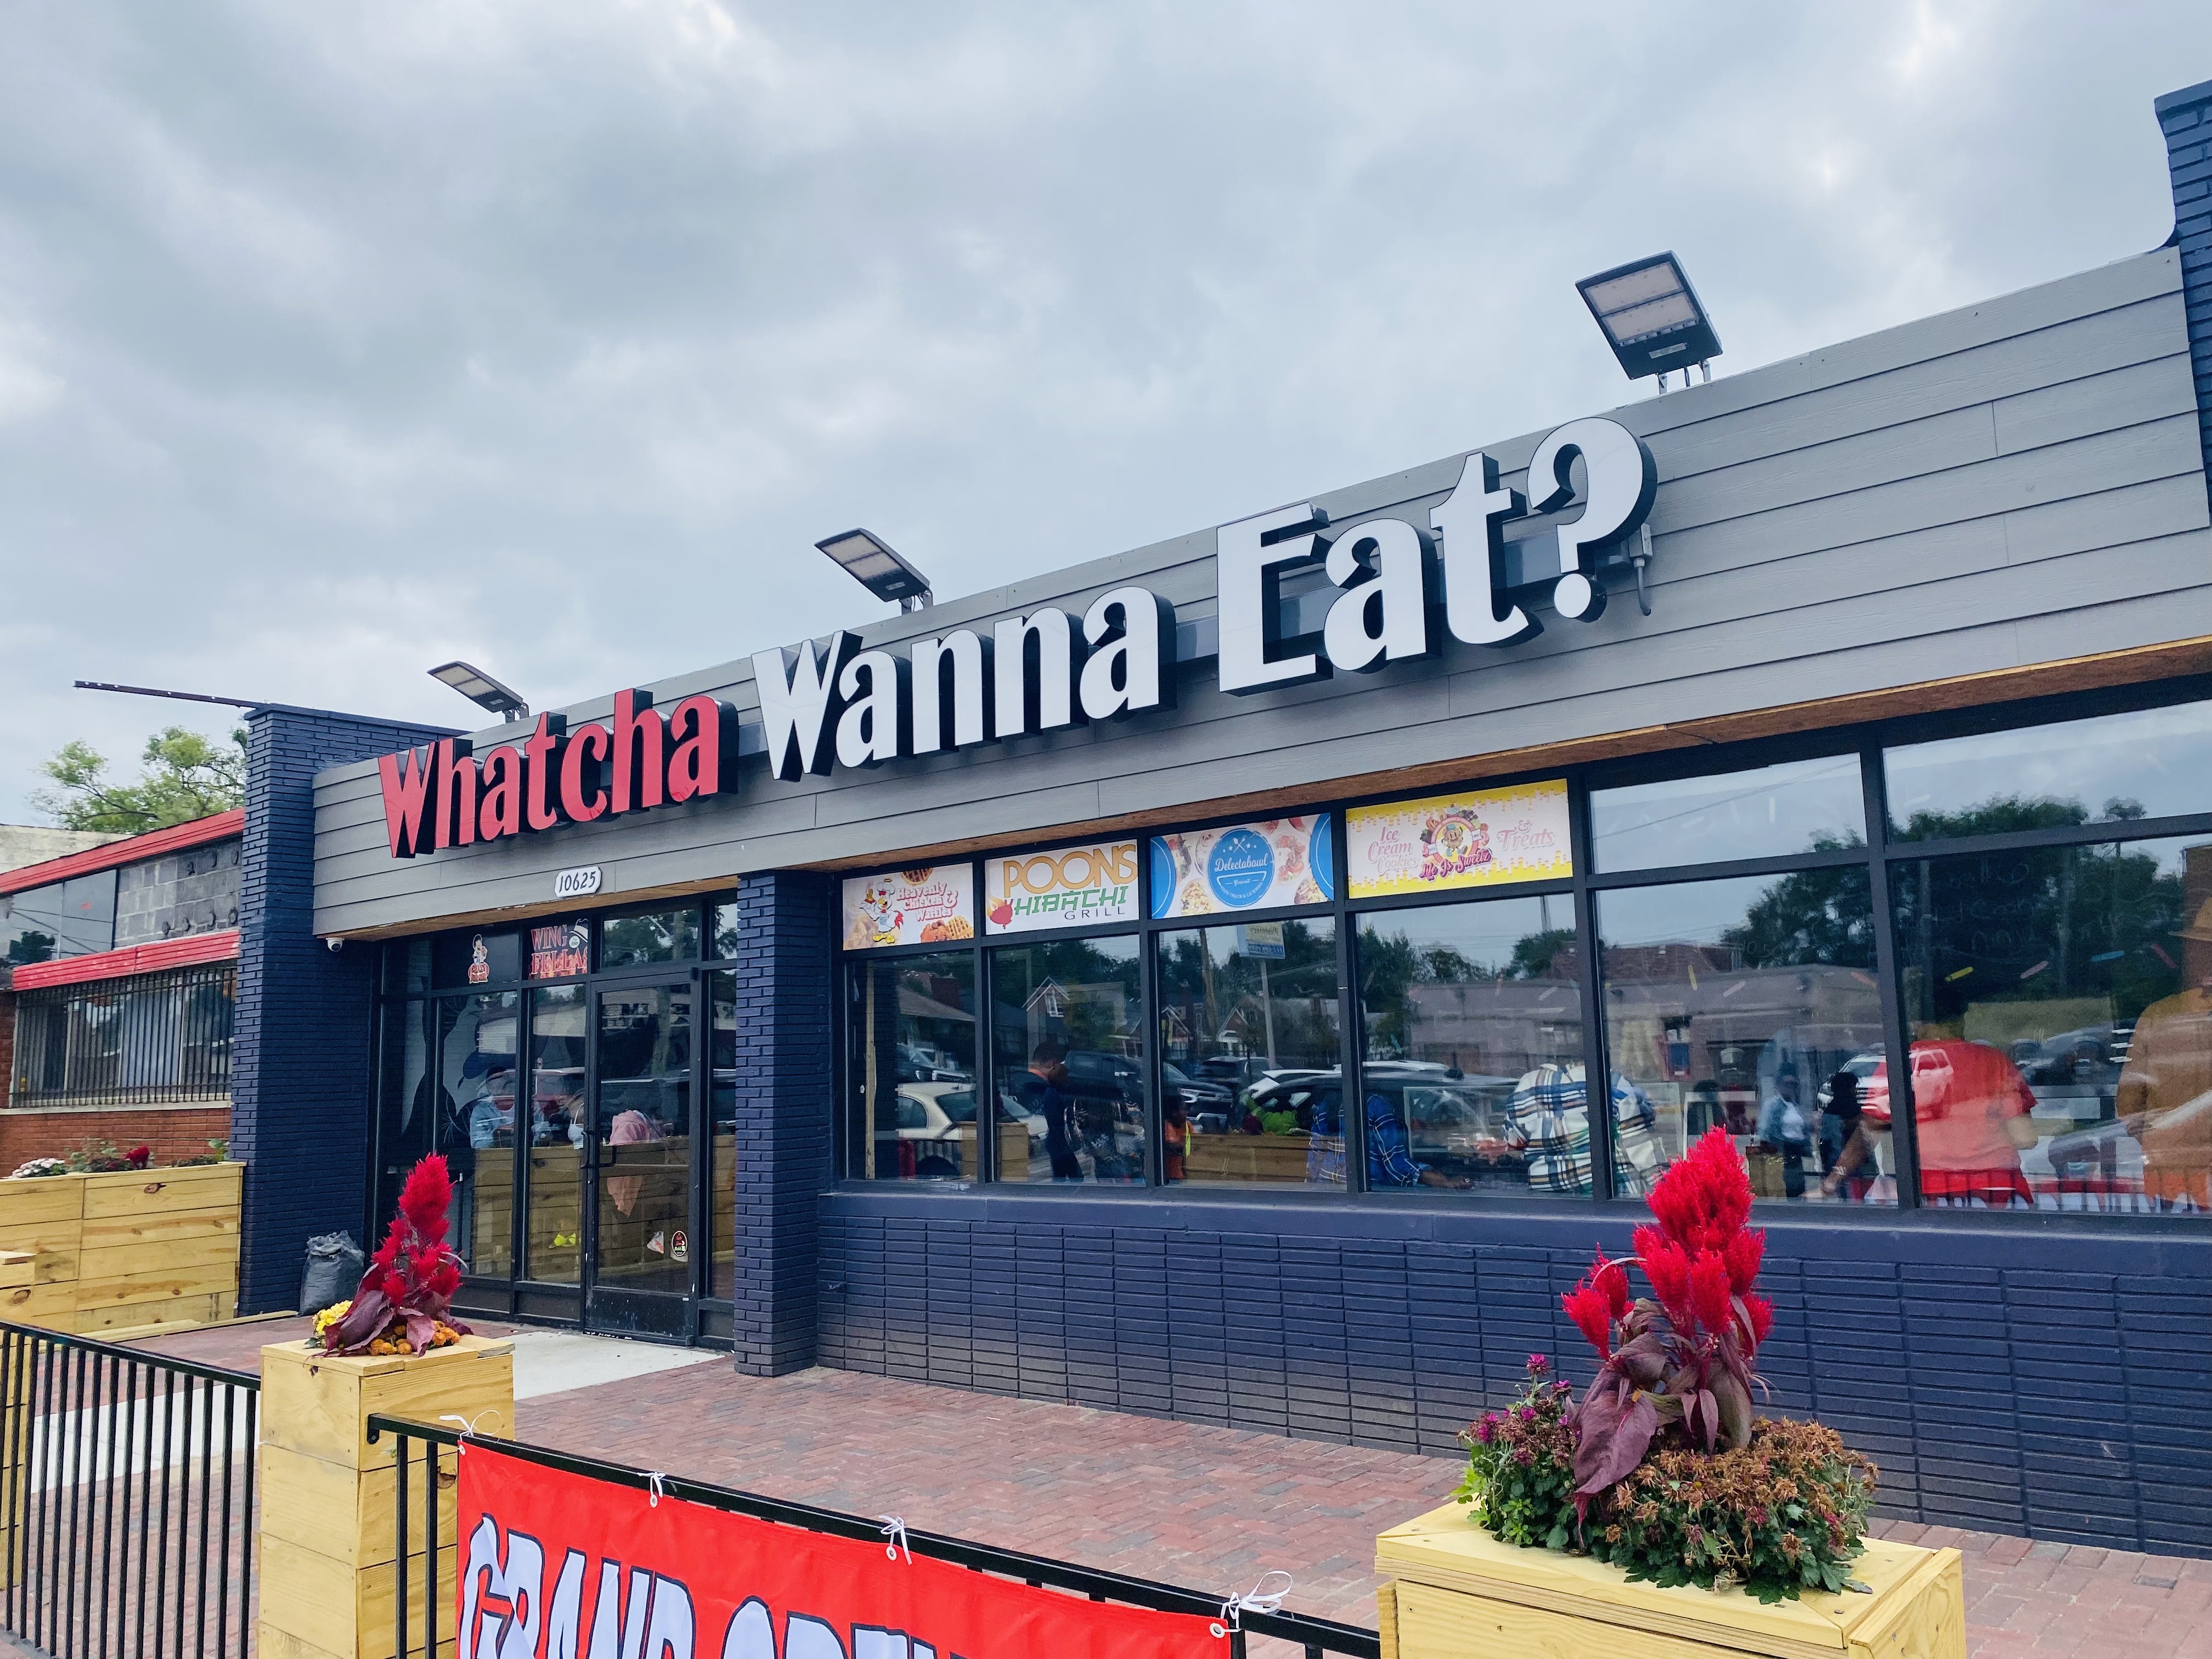 The entrance of Whatcha Wanna Eat Food Hall in Detroit, Michigan.